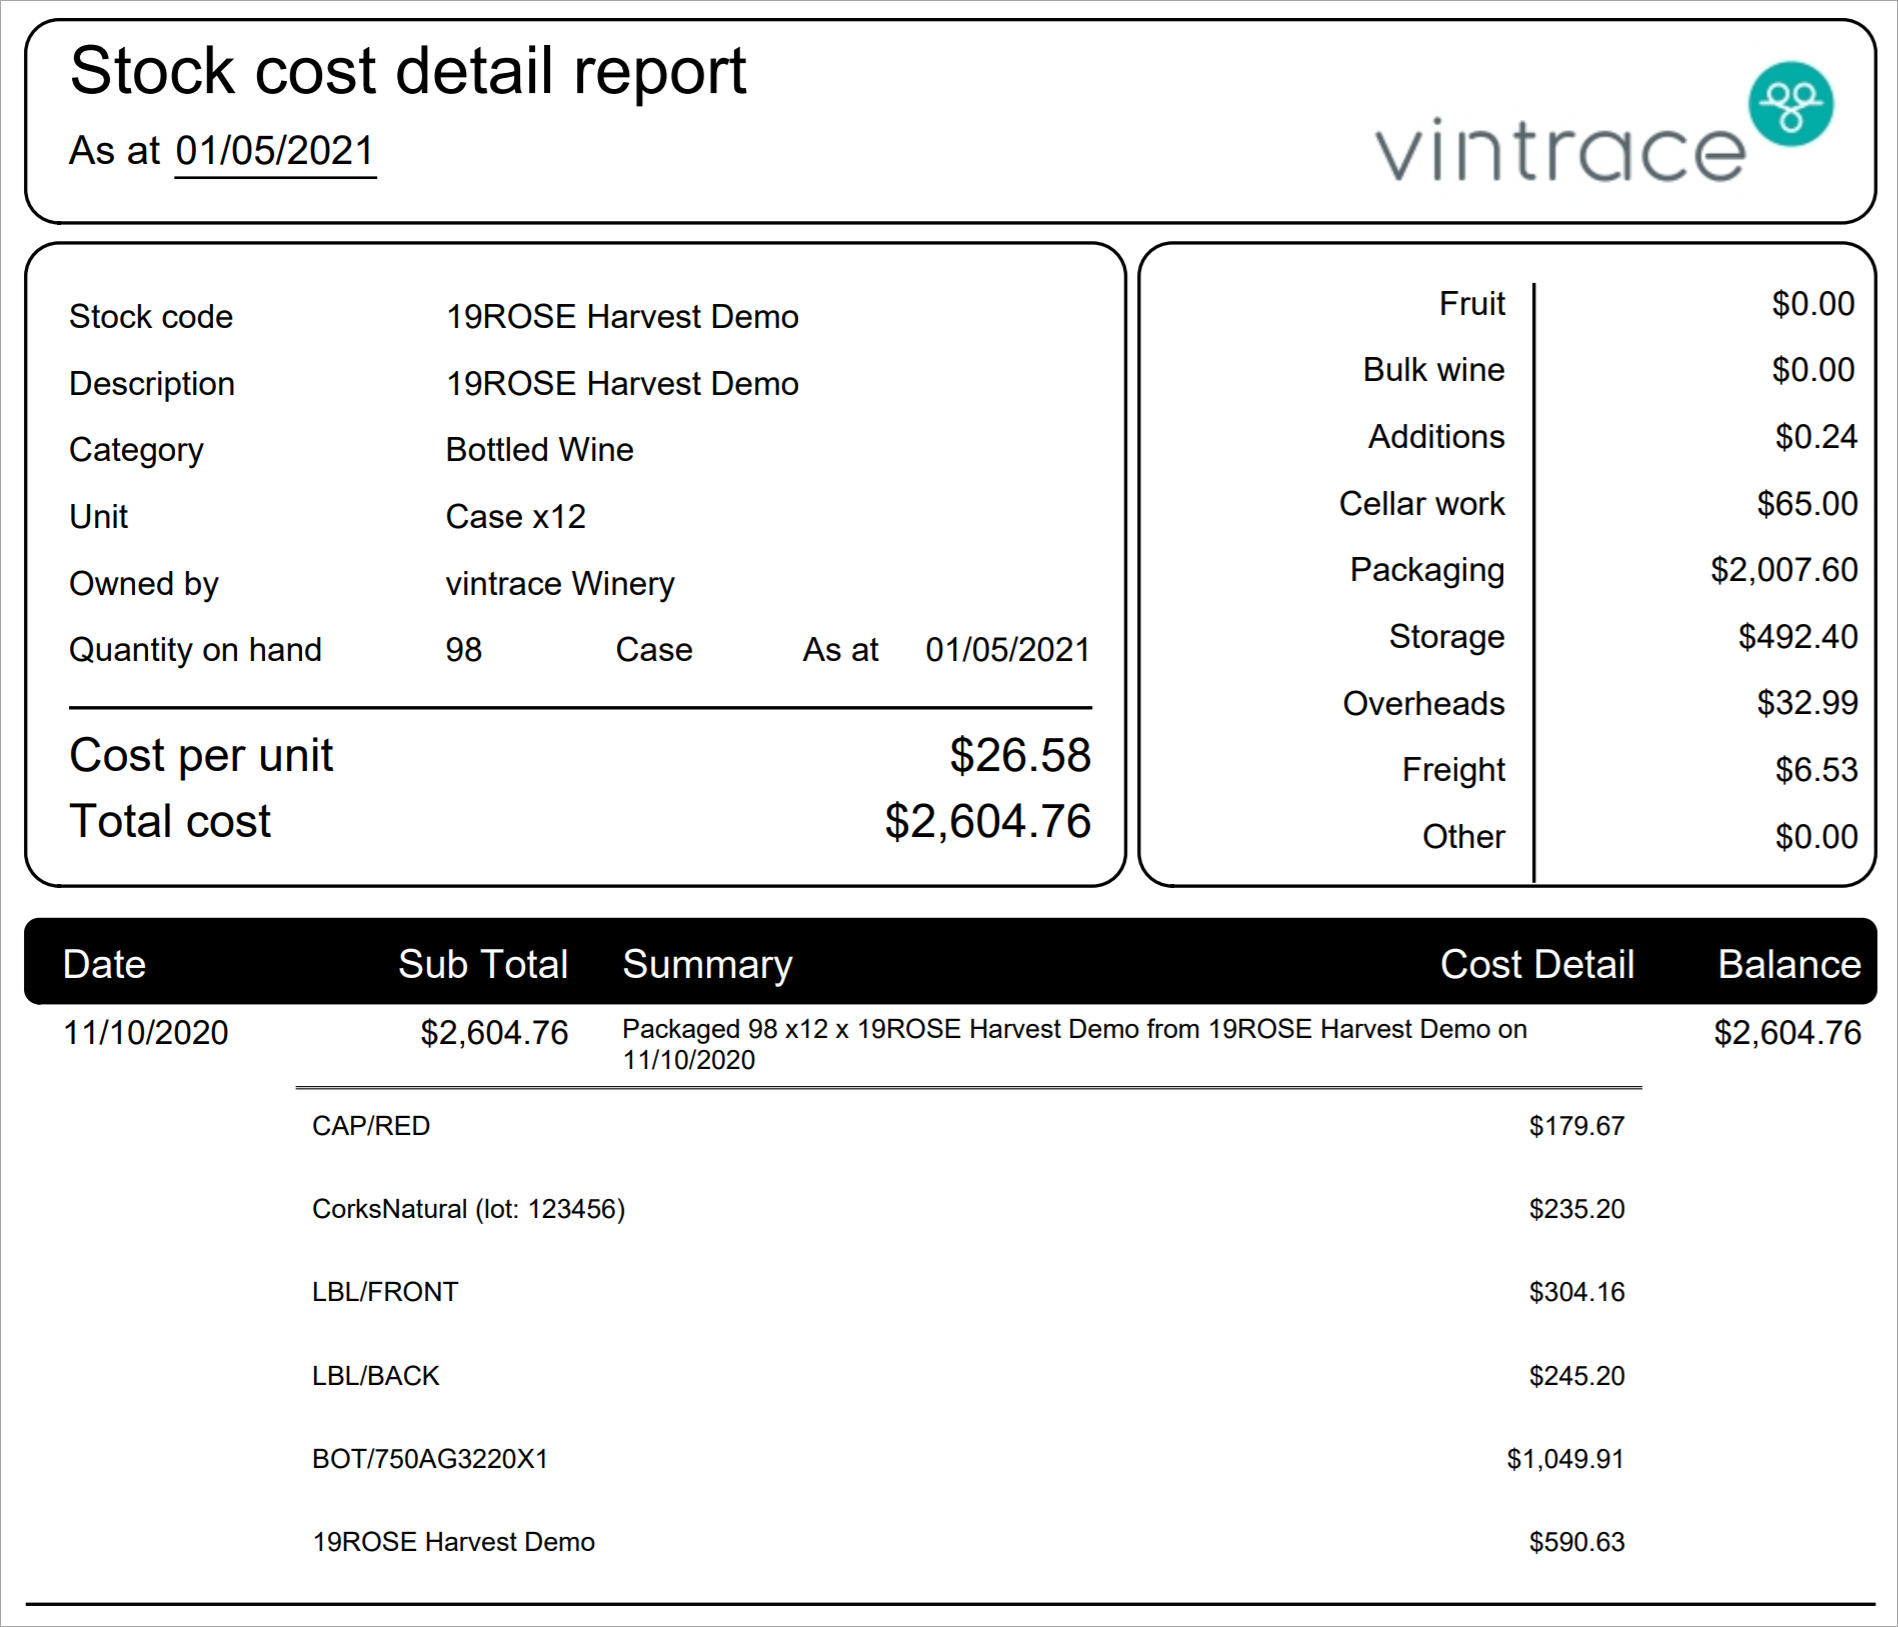 Stock_Cost_Detail_Report_PDF_-_19Rose_Harvest_Demo_20210105.png